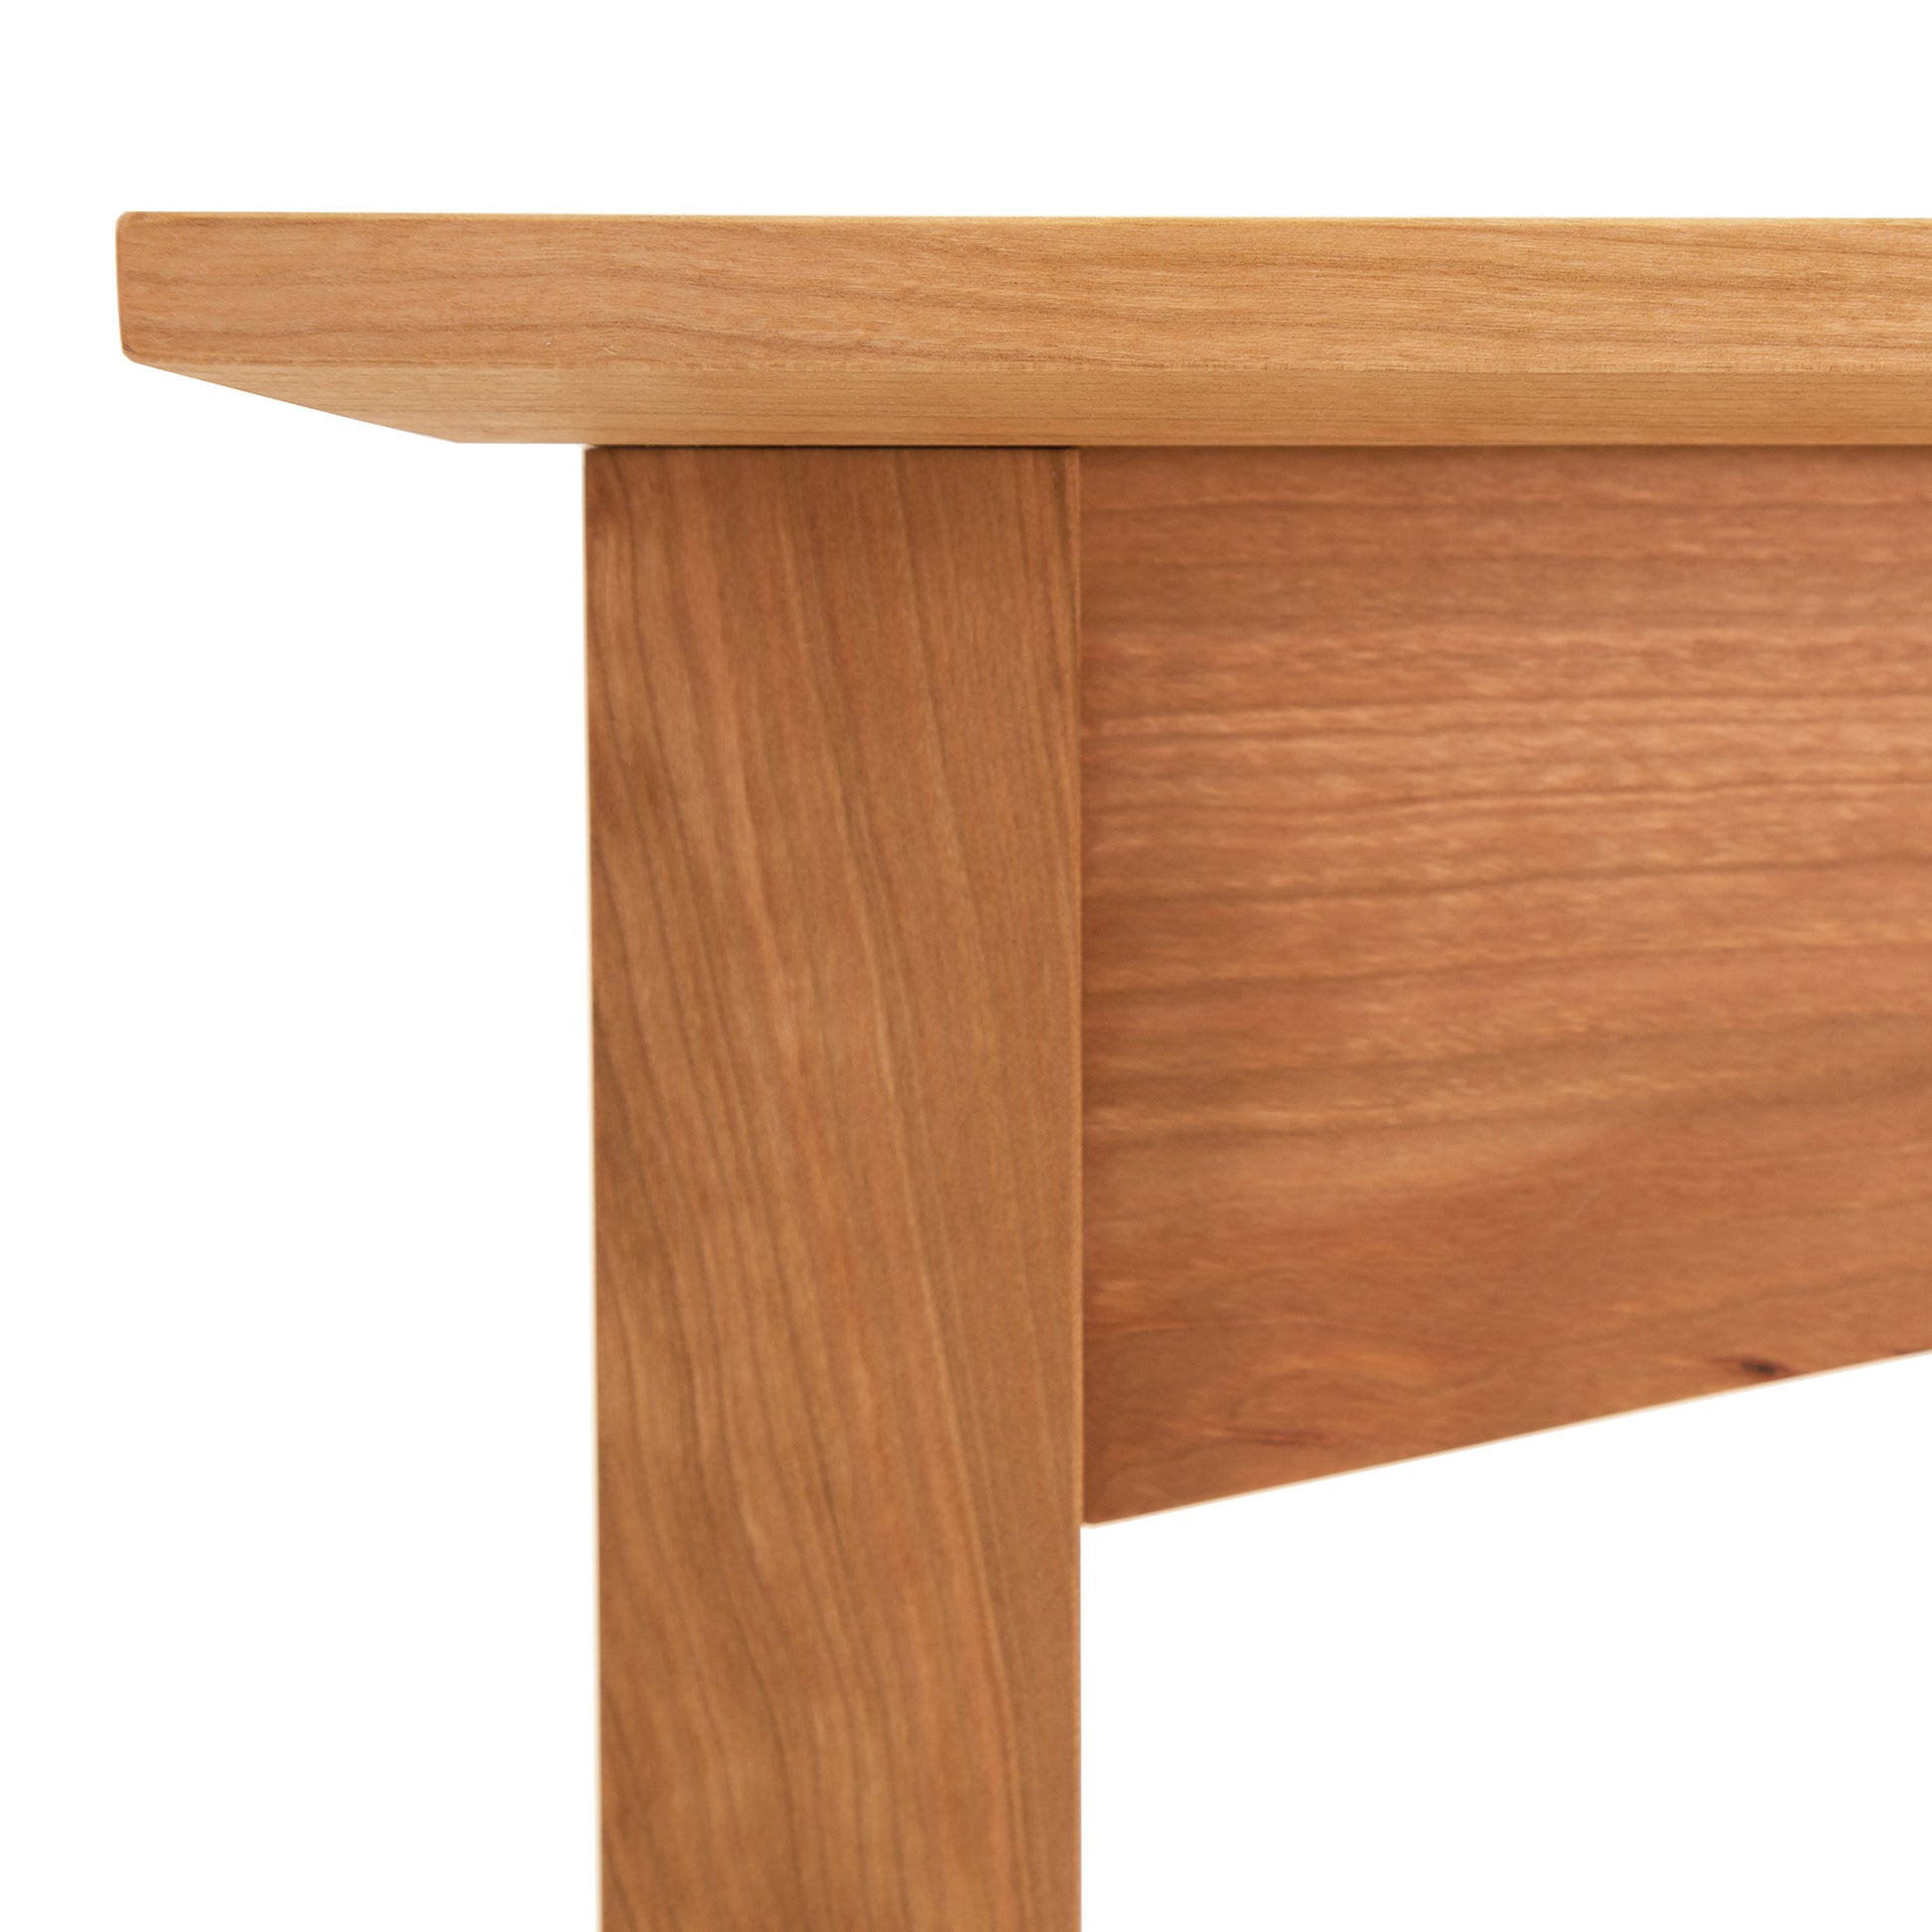 Detail of an eco-friendly American Shaker Sofa Table corner from Maple Corner Woodworks showing the tabletop and leg with a smooth finish and grain texture.